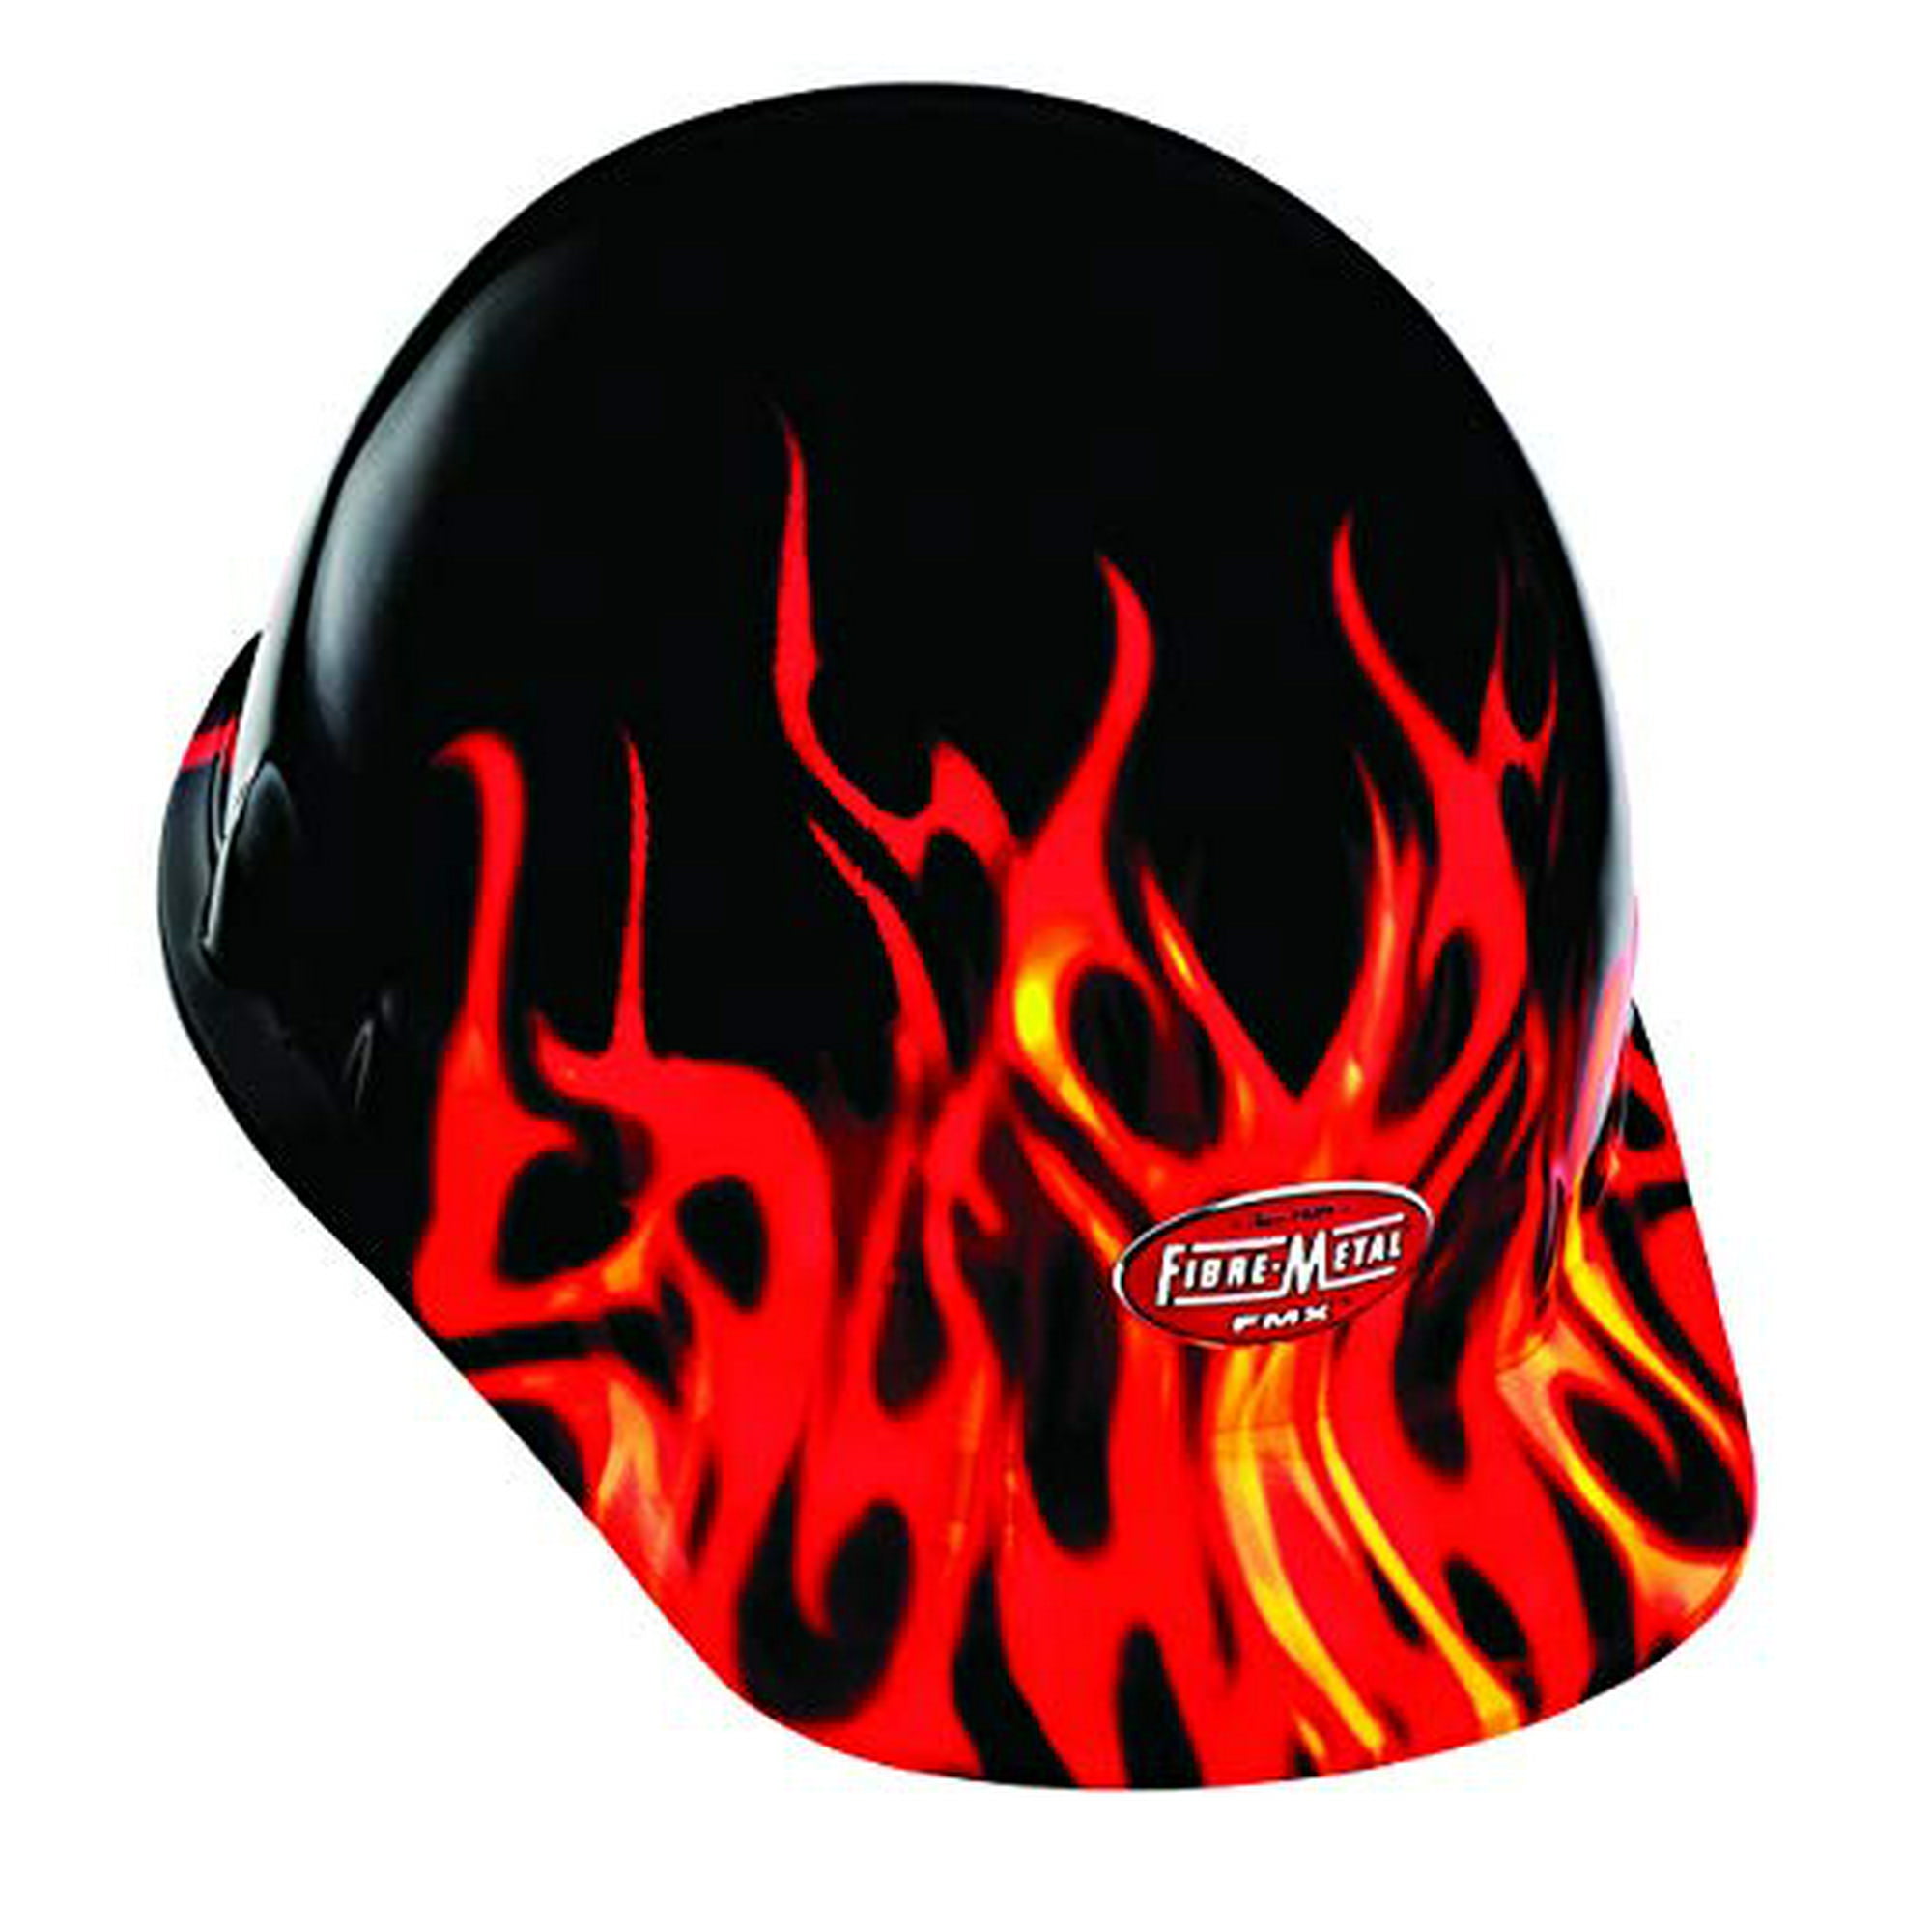 FMX Flame Full Graphic Fibre-Metal by Honeywell Supereight Thermoplastic Cap-Style Hard Hat with 8-Point Ratchet Suspension